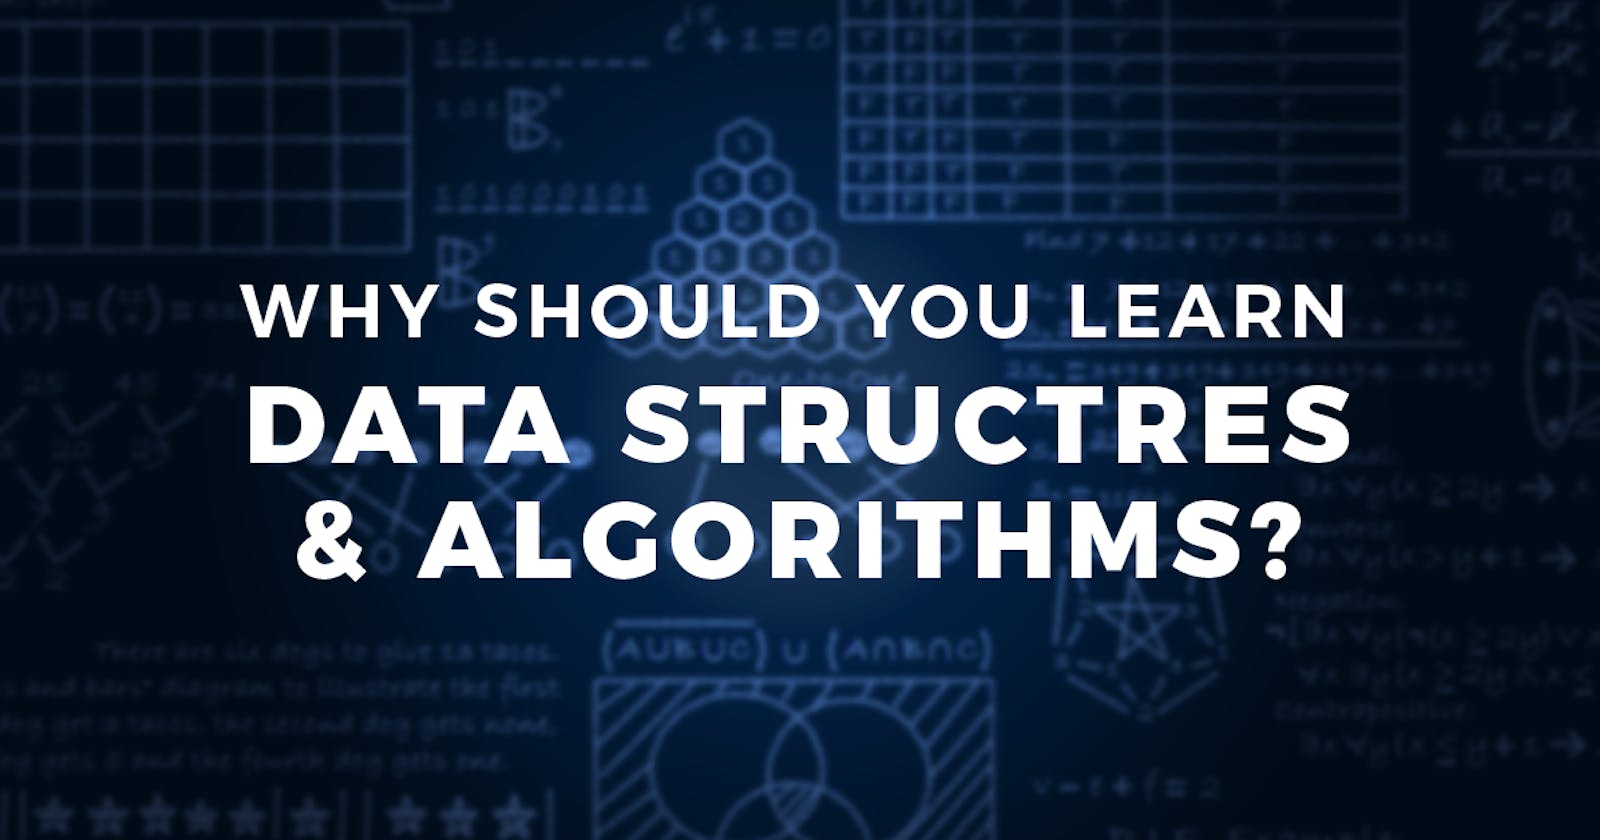 Is it necessary to learn data structures and algorithms for machine learning?